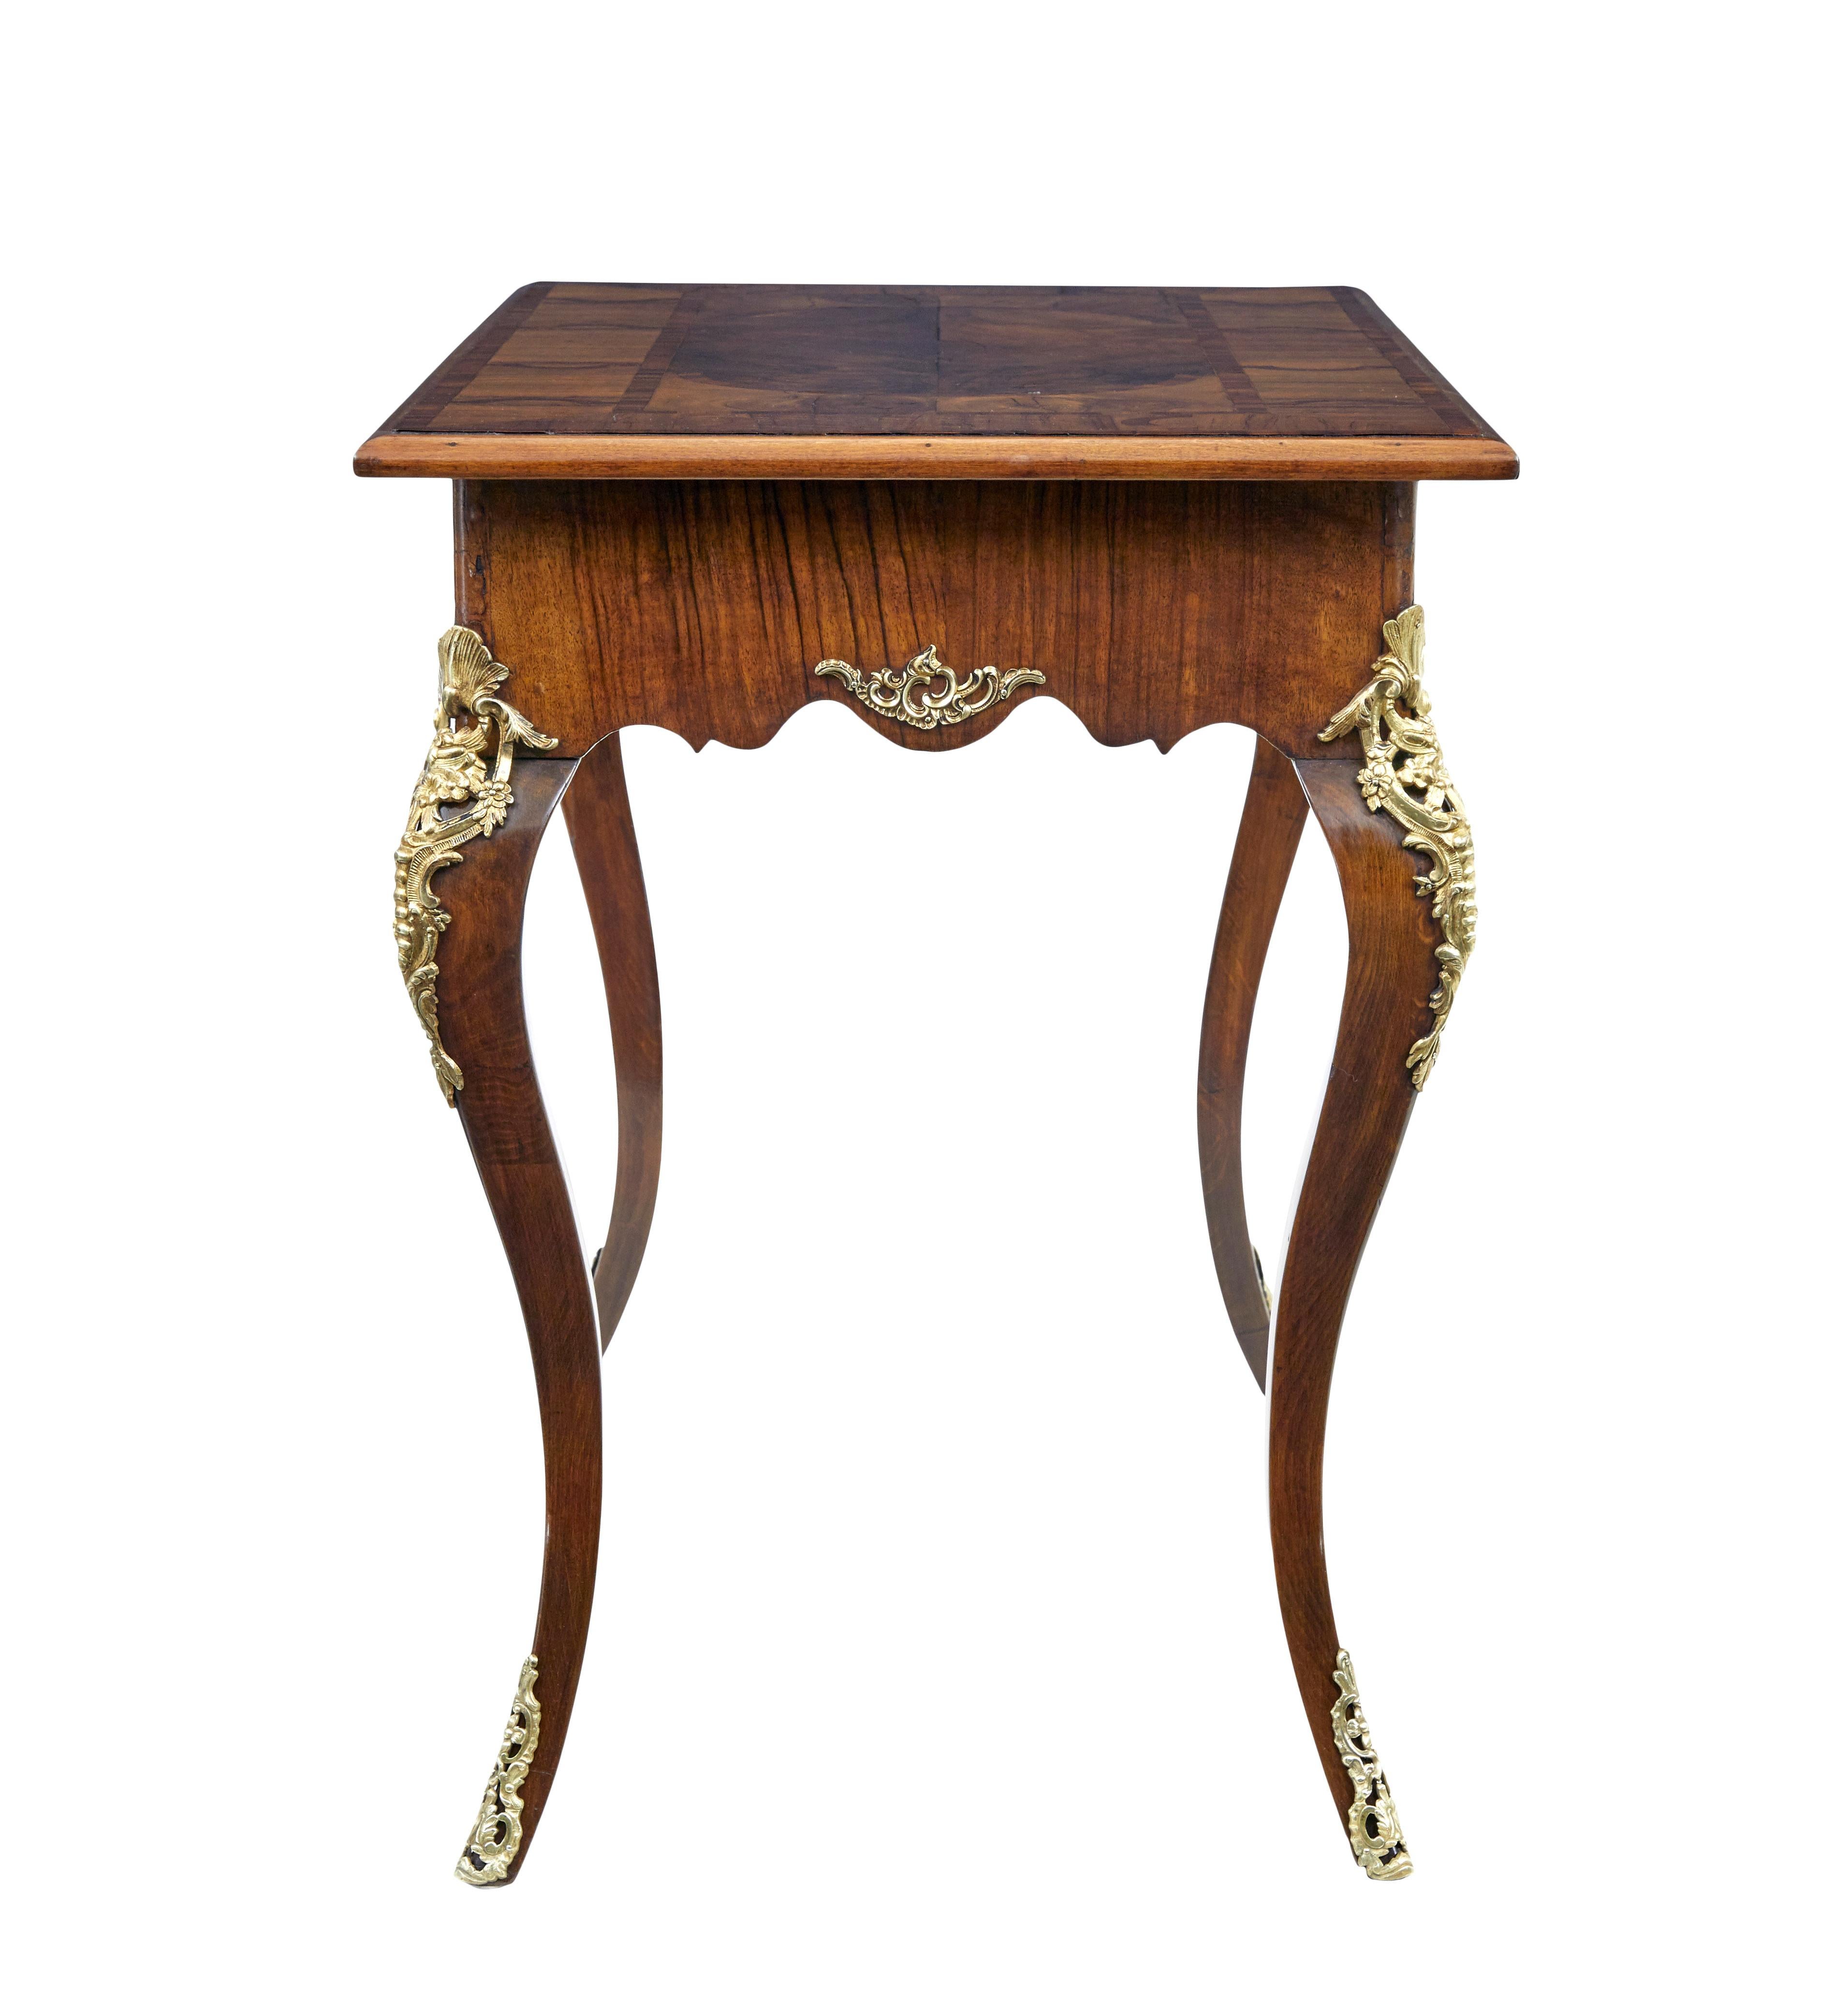 19th Century rococo revival walnut and ormolu side table For Sale 1